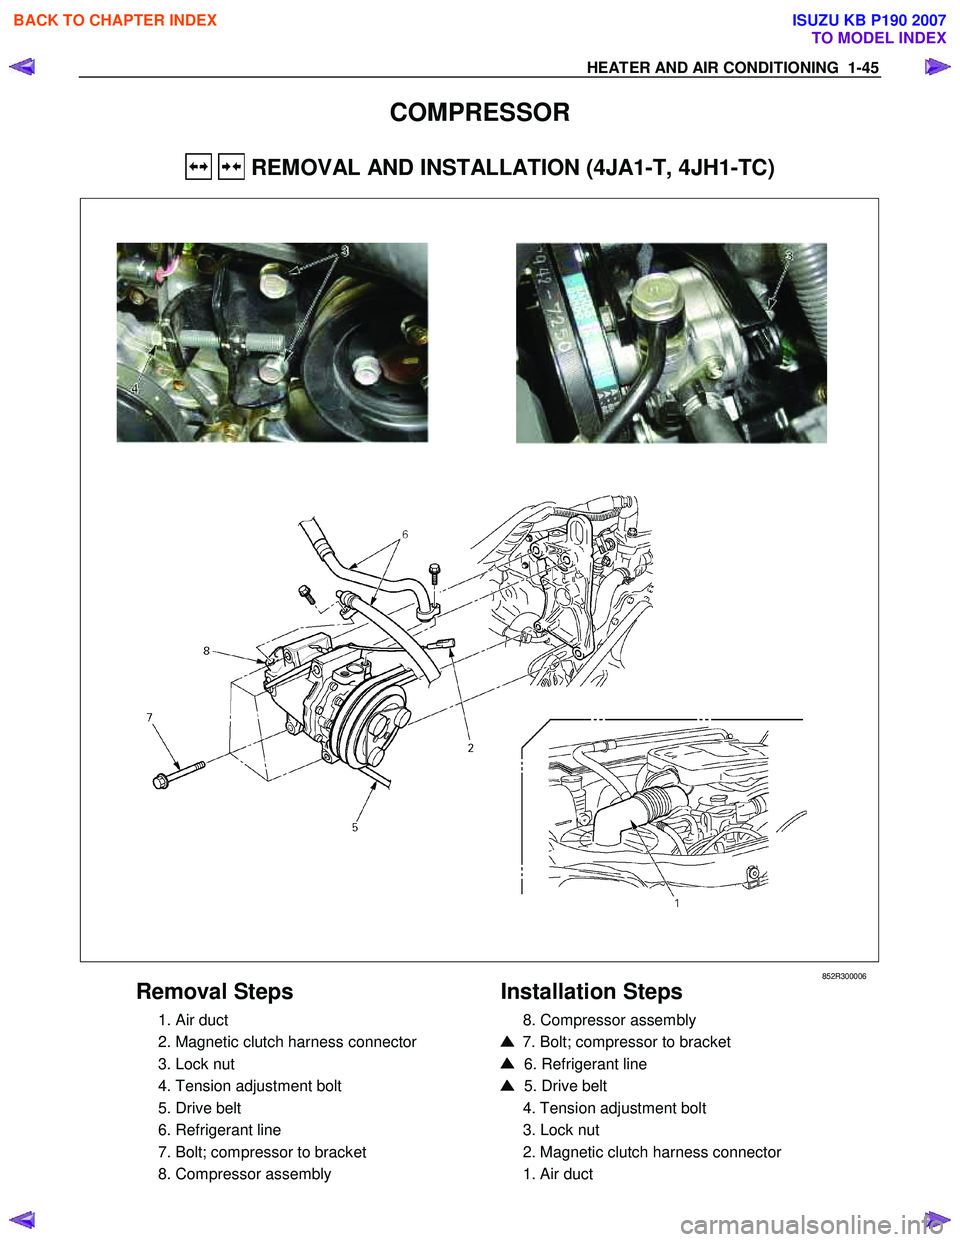 ISUZU KB P190 2007  Workshop Repair Manual HEATER AND AIR CONDITIONING  1-45 
COMPRESSOR 
  REMOVAL AND INSTALLATION (4JA1-T, 4JH1-TC) 
   
 
  
 
 
 
852R300006 
Removal Steps 
  1. Air duct 
  2. Magnetic clutch harness connector 
  3. Lock 